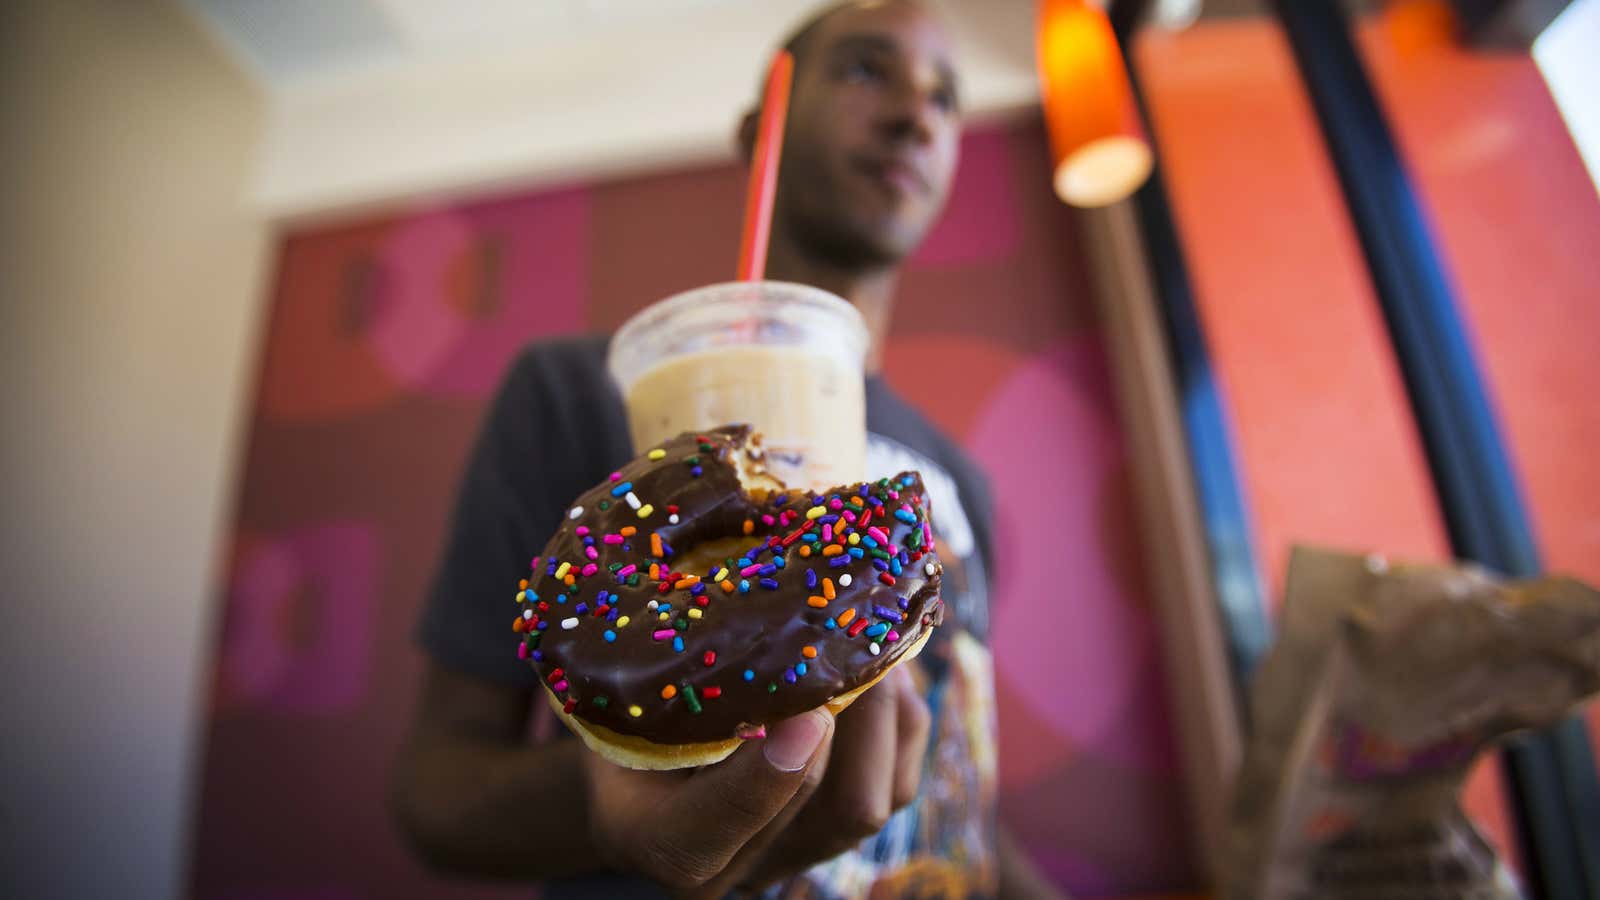 Dunkin’ Donuts is banking on curbside delivery to help boost business against its rivals.